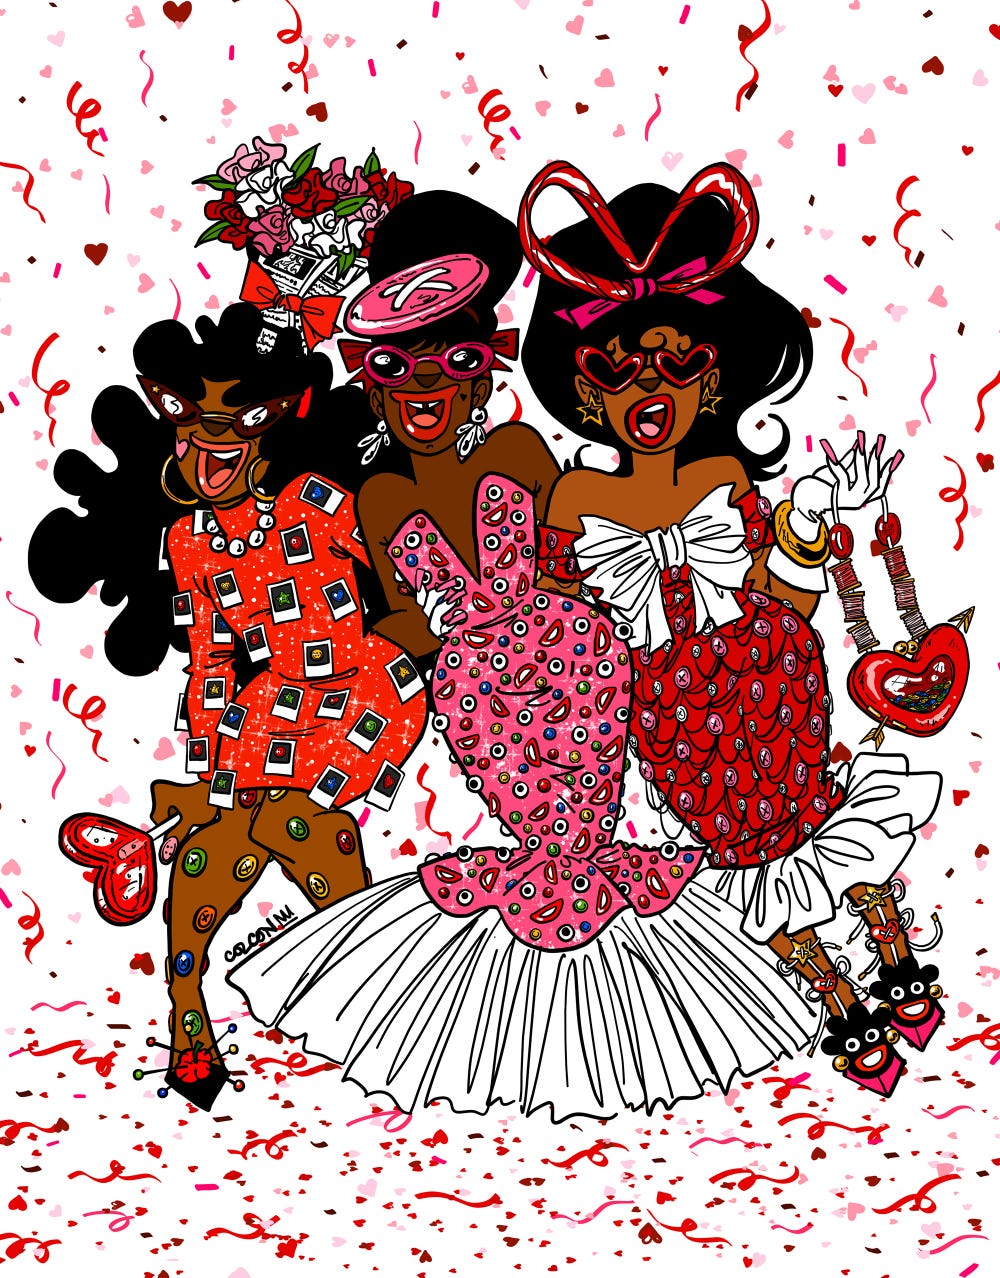 sketch of three women surrounded by pink and red confetti wearing pink and red outfits